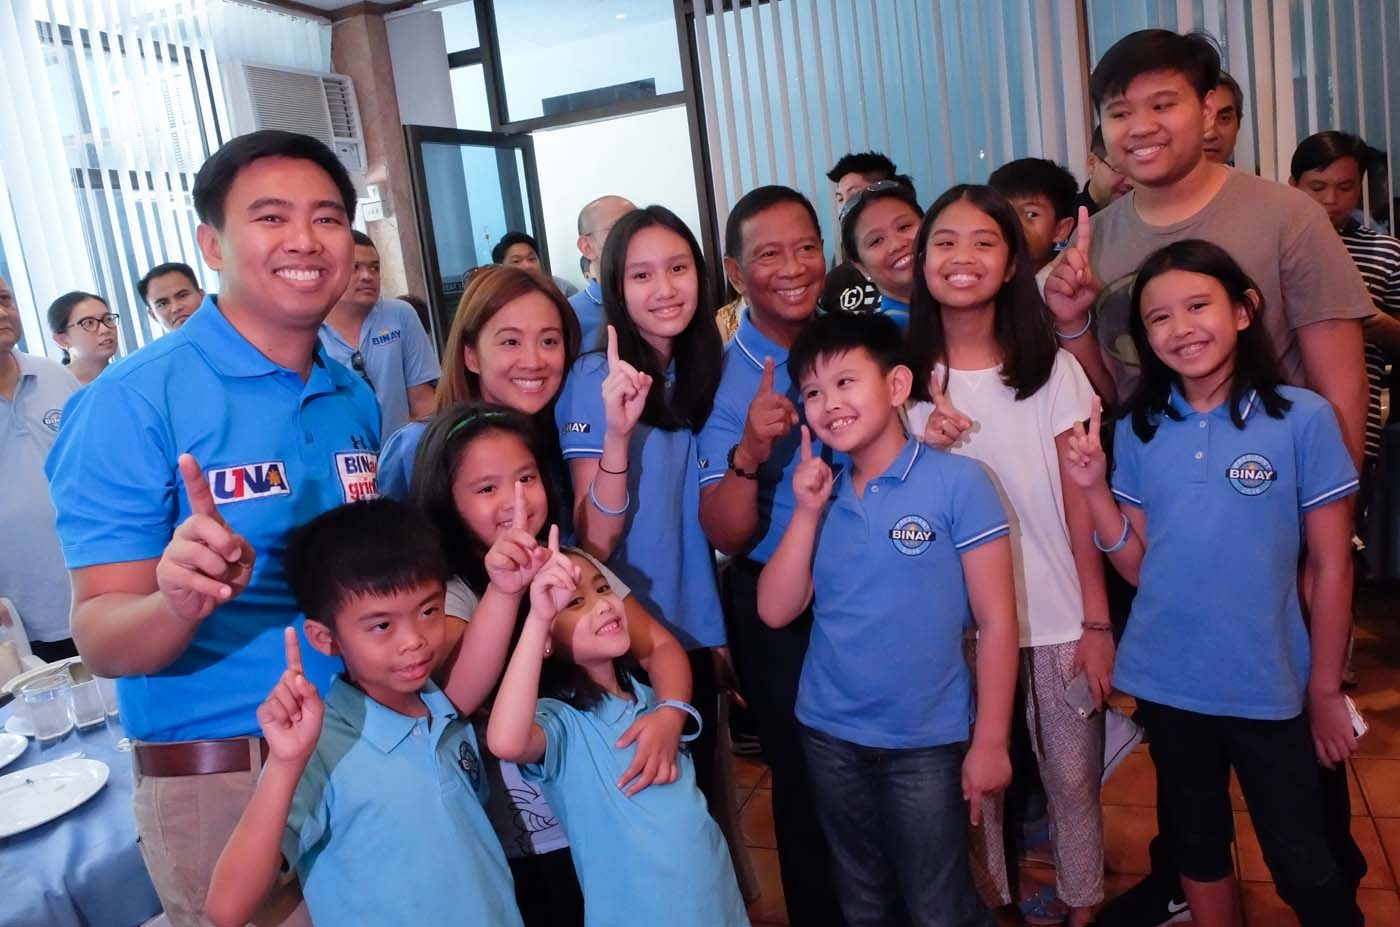 THE GRANDKIDS. Some of Binay's grandchildren pose with him a few hours before the last presidential debate in Dagupan City, Pangasinan. Photo by Alecs Ongcal/Rappler  